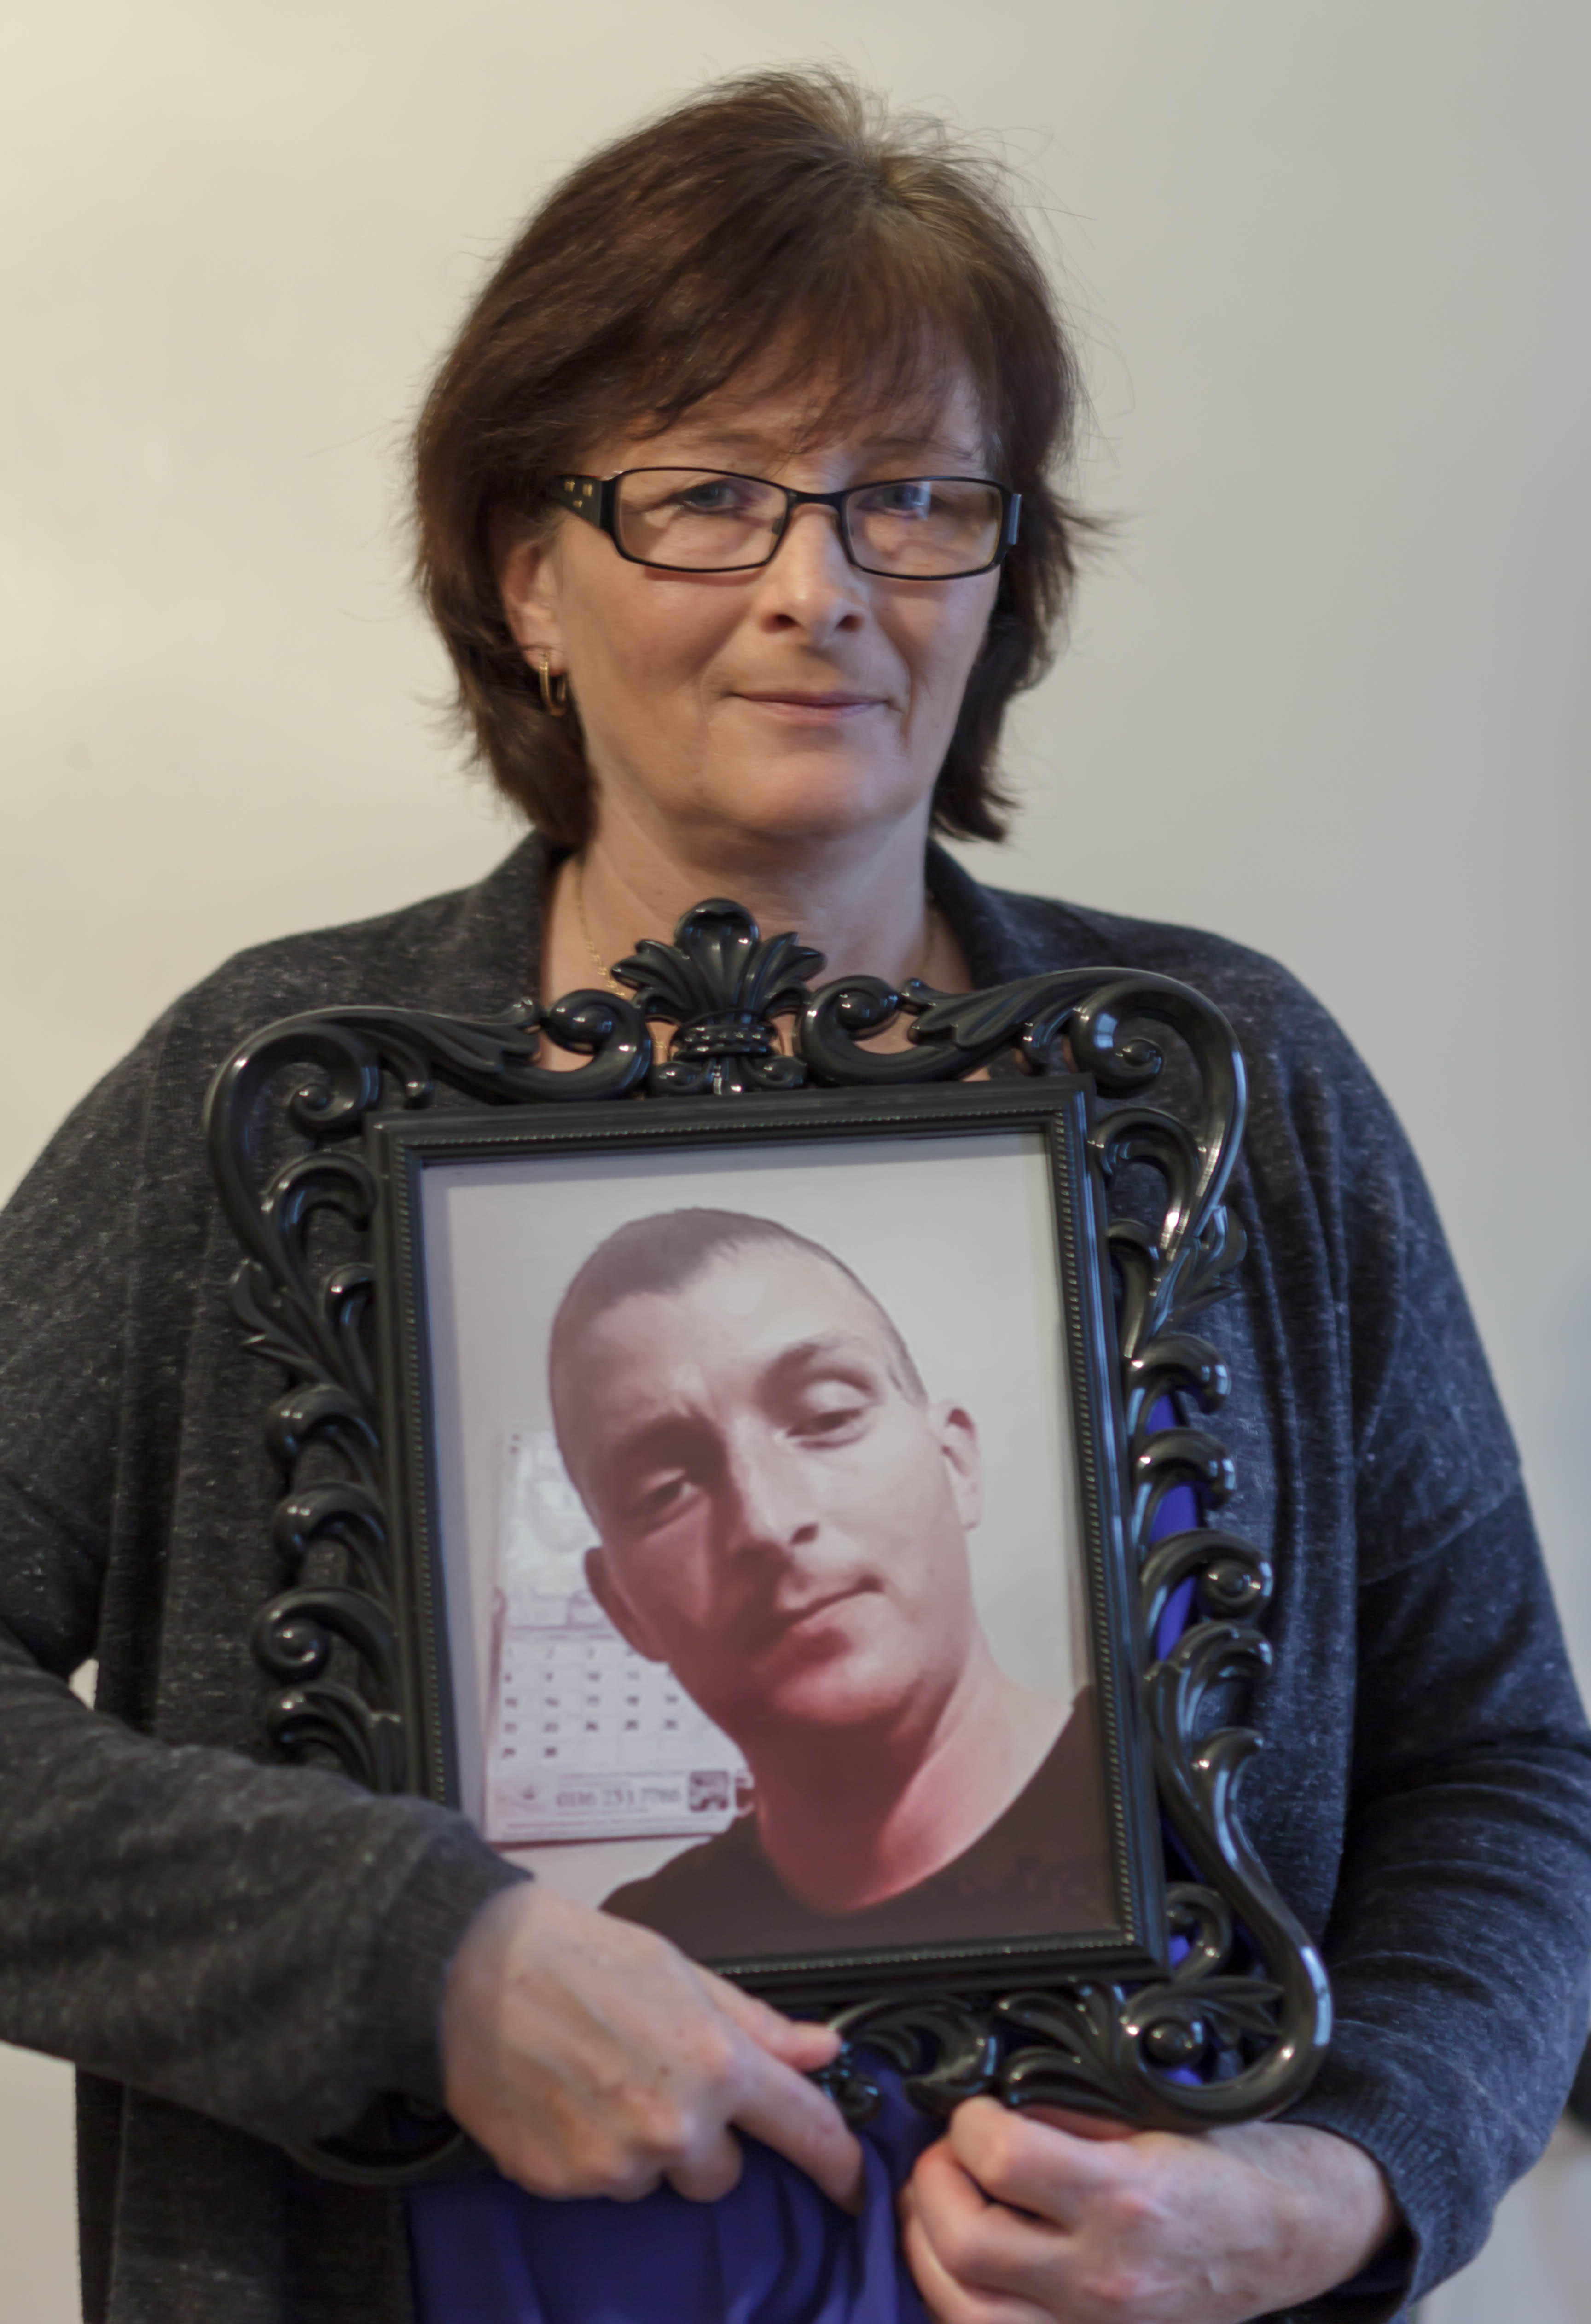 Cindy Woodings's son, Luke, was found hanging in his cell 11 days after his incarceration [Hyder Abbasi/Al Jazeera]